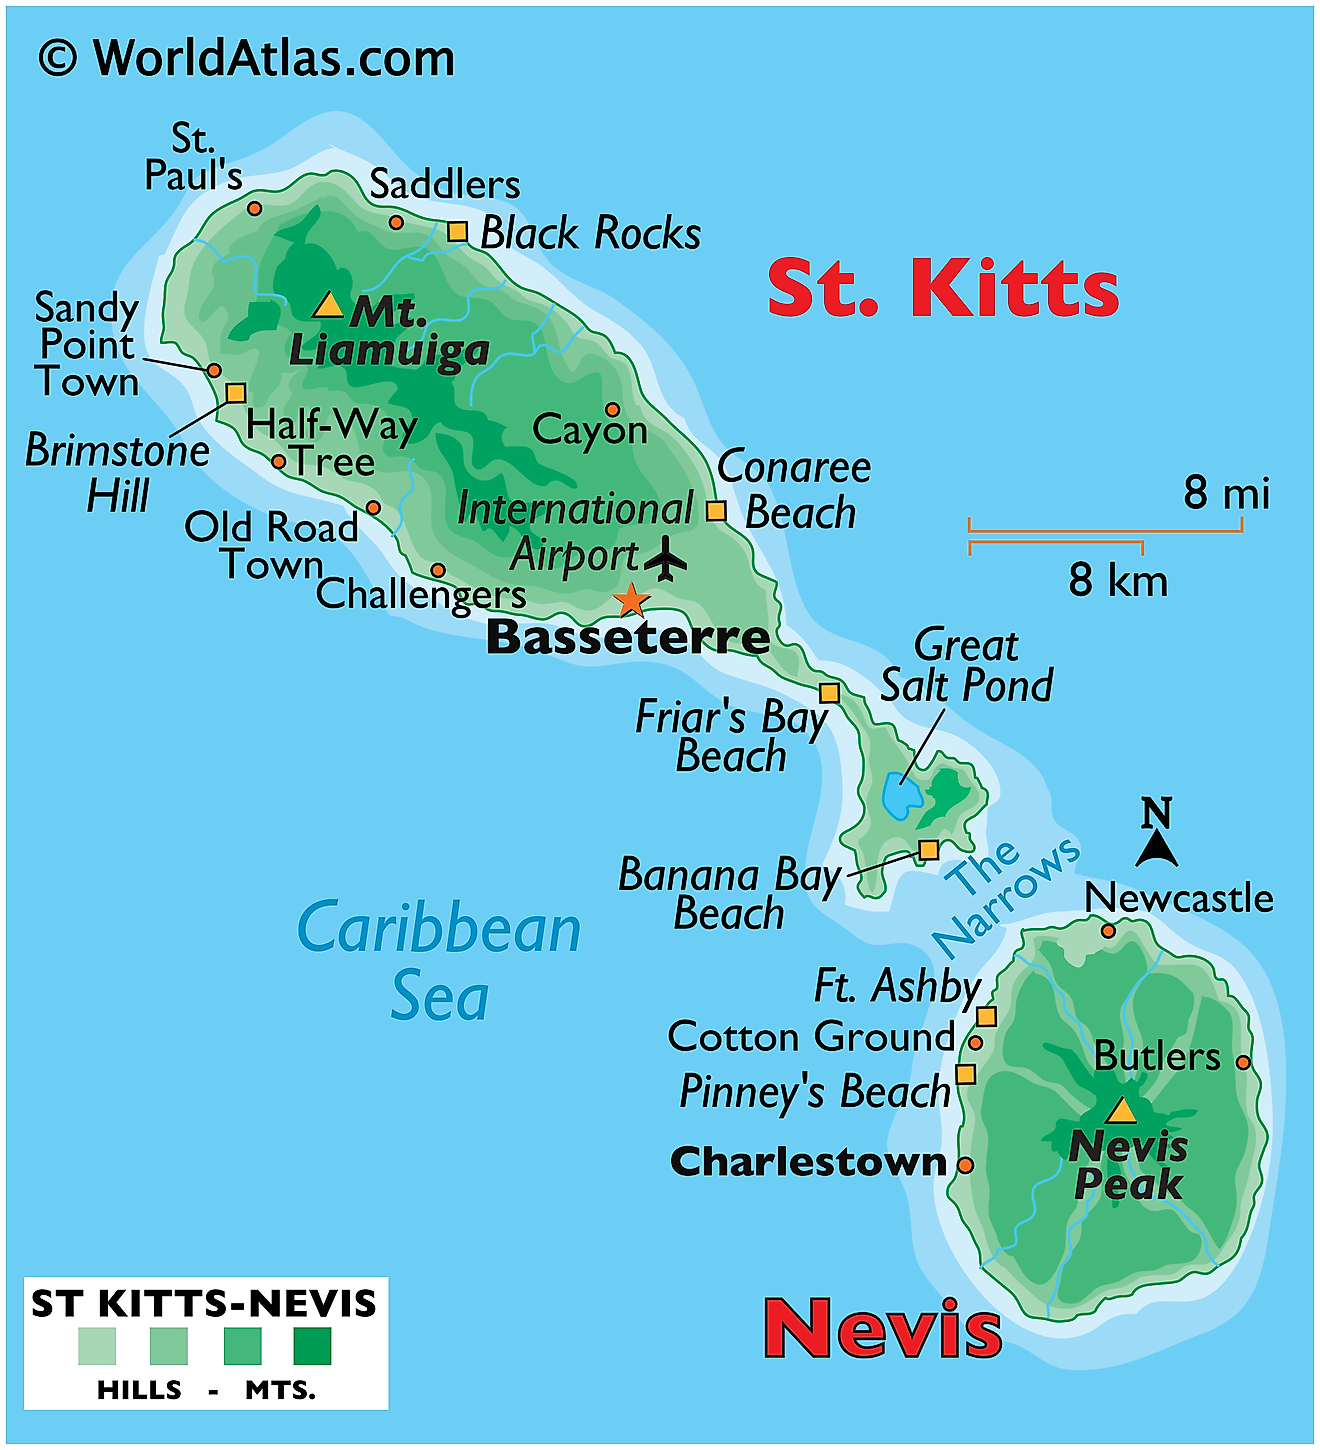 Physical Map of Saint Kitts and Nevis showing relief, islands, mountains, beaches, important settlements, etc.